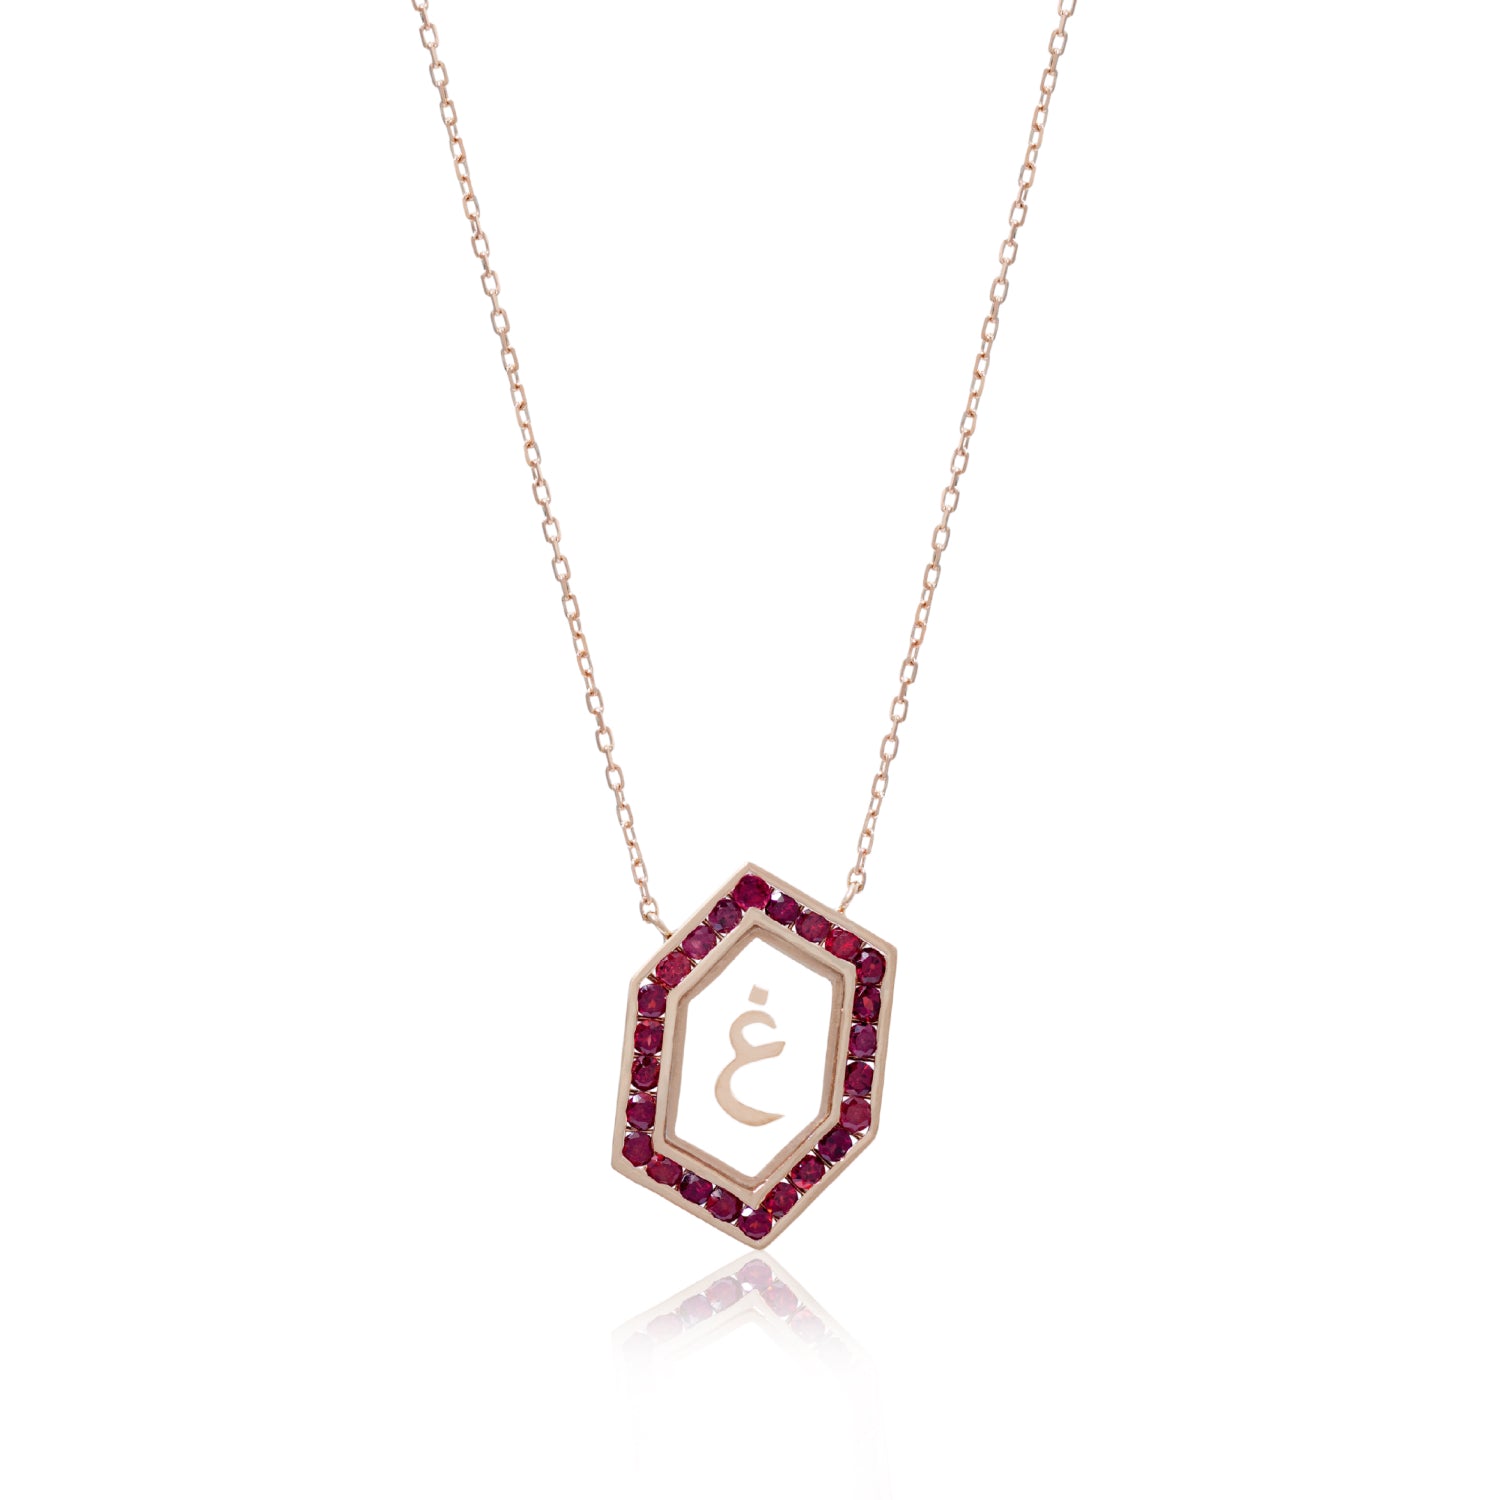 Qamoos 1.0 Letter غ Ruby Necklace in Rose Gold